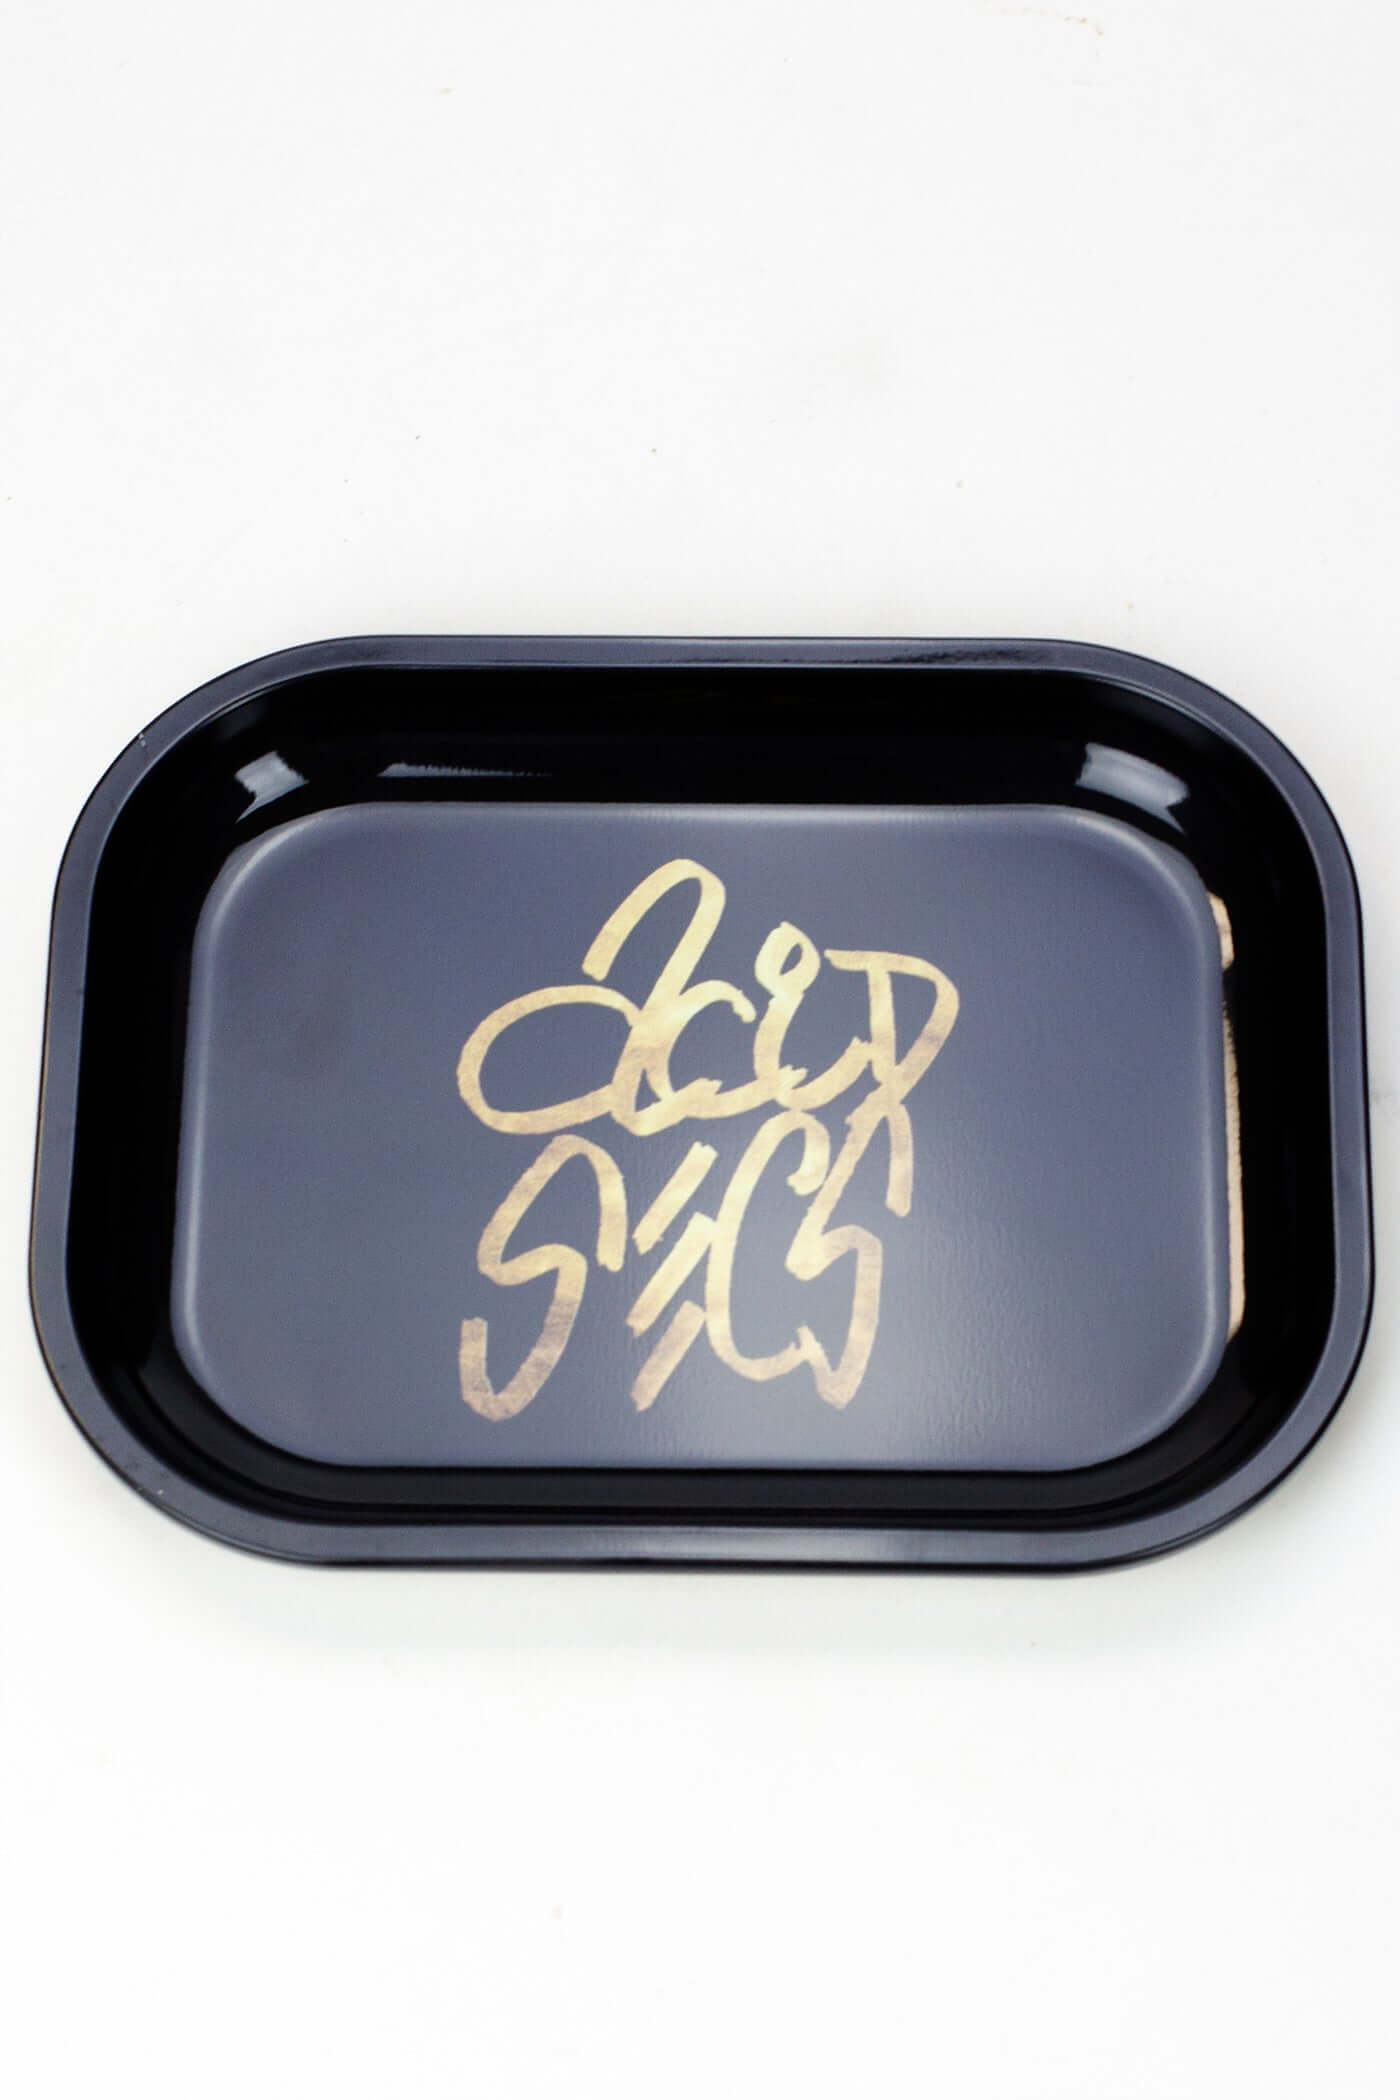 Acid Secs Metal Mini Rolling Tray
Acid Secs Productions Inc.
Acid Secs Metal Mini Rolling Tray provides a smooth surface to roll your smoking products in. With rounded edges and deep walls, it allows every piece to be scooped out without getting stuck in corners like many other trays. Mini Tray Size : 7" x 5.5" (18cm x 14cm) Eligible for $15 Flat Rate Shipping
1-1/4, 100 bucks, 100 dollar, 100% silver, 24K, 24K gold, 24K Gold Rolling Papers, 420, Accessories, accessory, Acid Productions Inc, Acid Secs, Acid